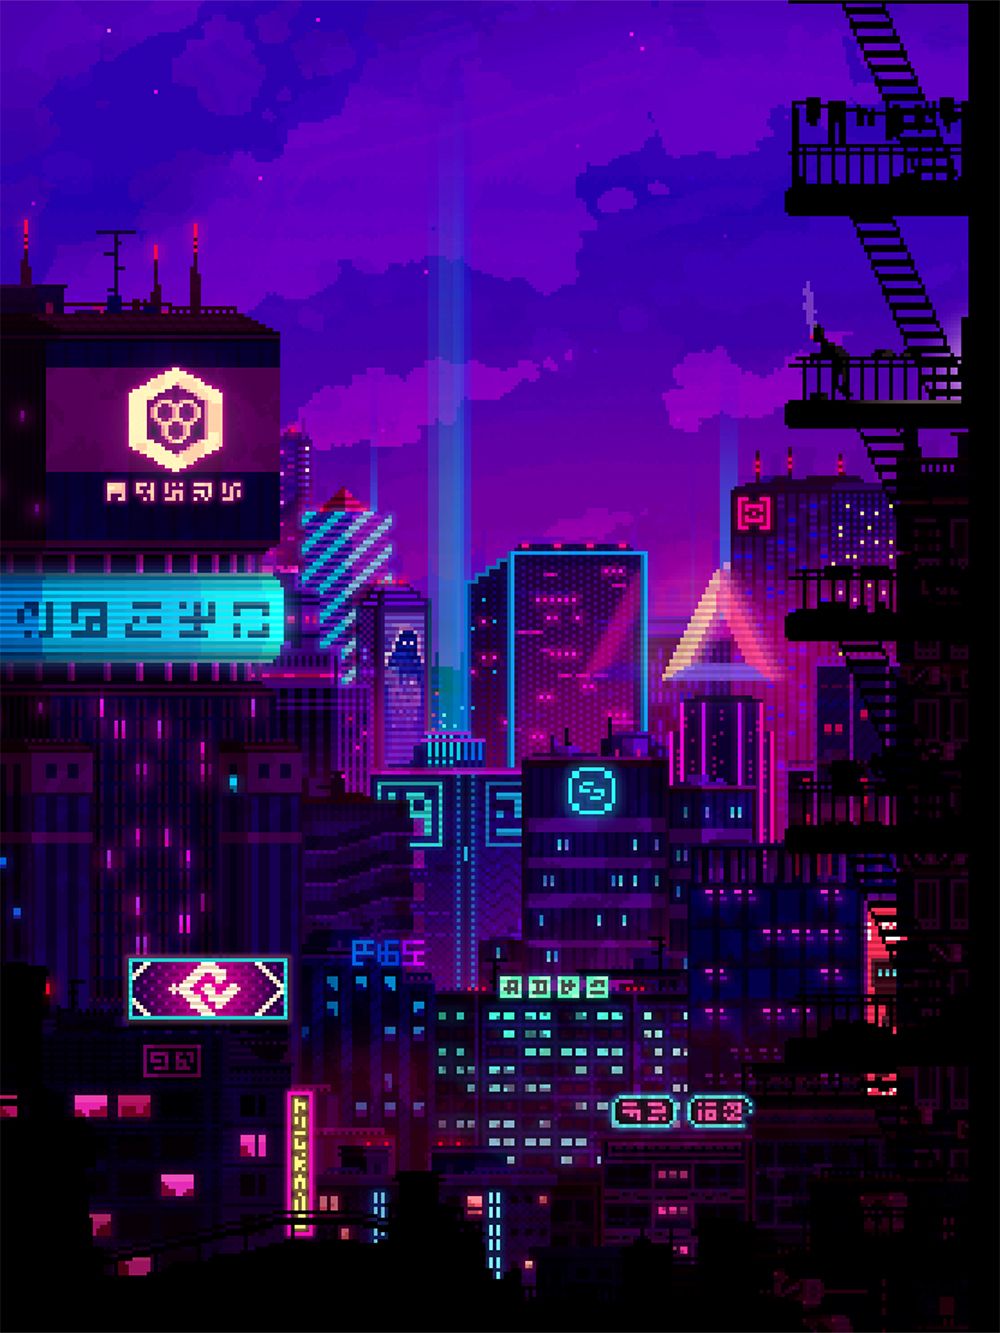 A purple and pink neon city at night - Pixel art